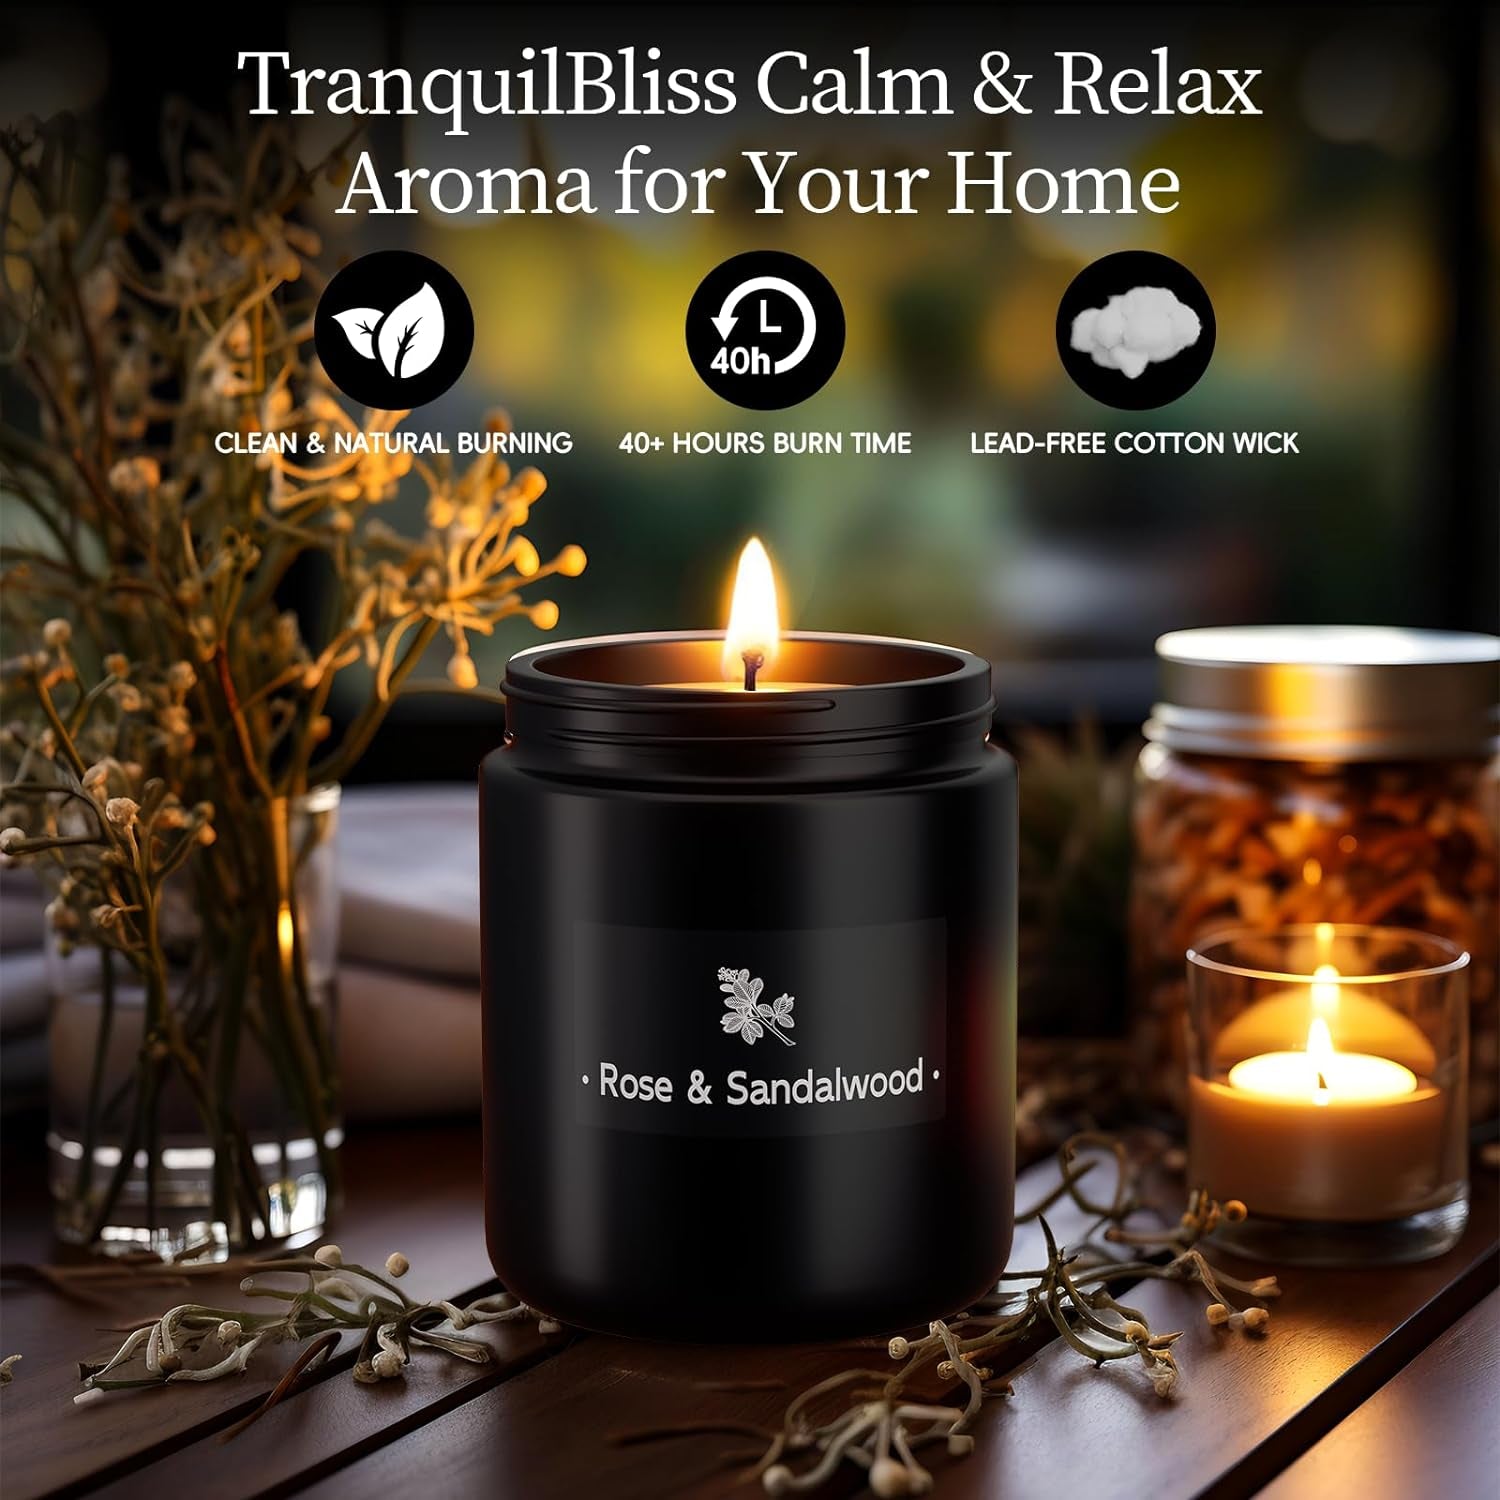 Scented Candles for Home Scented, Strong Fragranced Aromatherapy Candle - 7.6 Oz, 100% Soy Wax - Christmas Candles Scented for Men & Women in Black Jar, Rose & Sandalwood